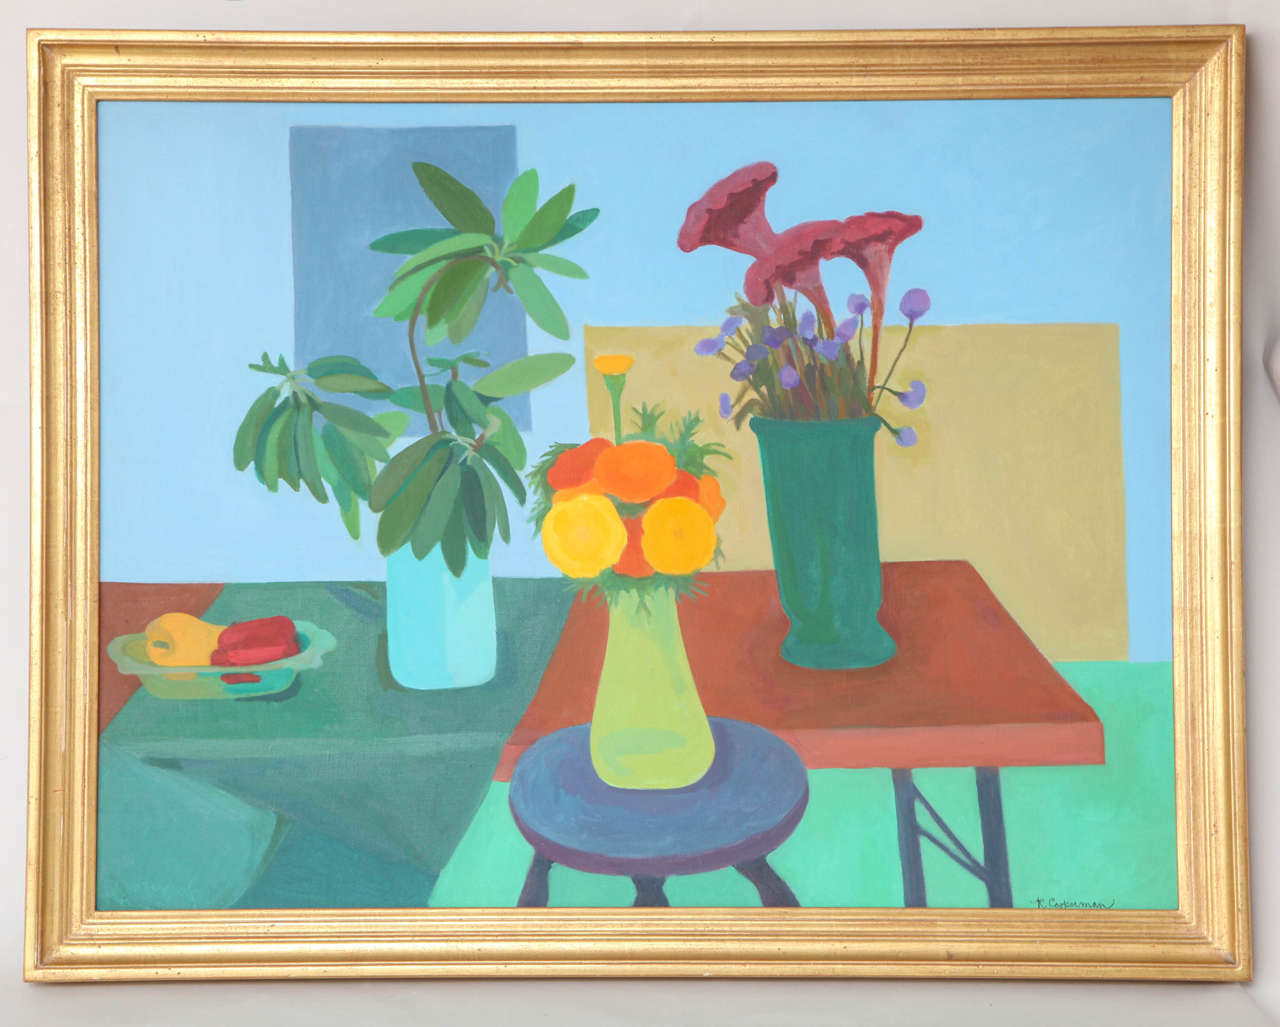 A beautiful oil painting of a still life arrangement of flowers simply rendered in oil on canvas by Rebecca Cooperman. Exhibited at Lever House by The League of Transient Beauty in 1989. In a gilded wood frame.